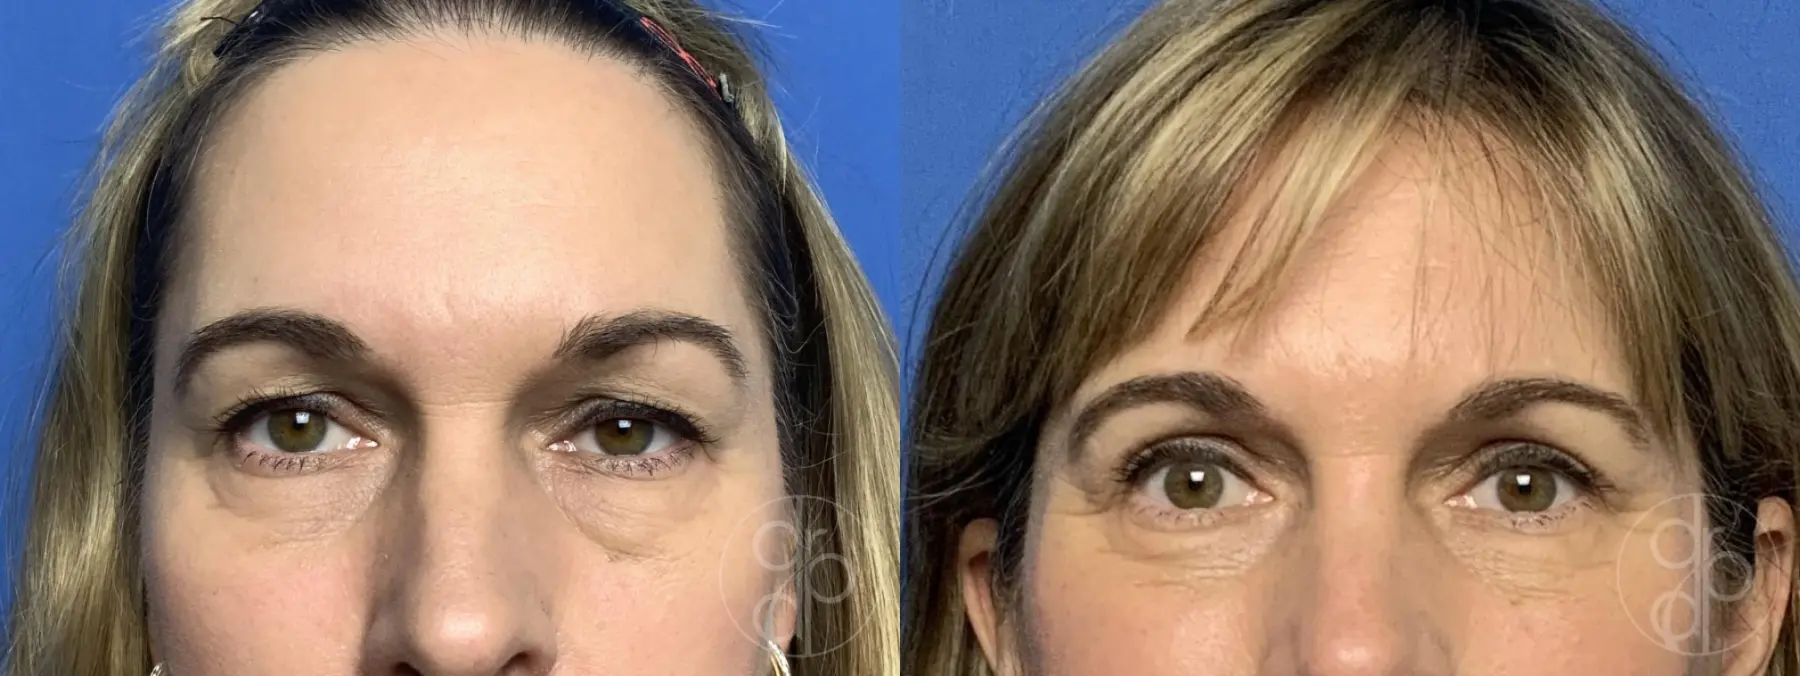 patient 13381 blepharoplasty before and after result - Before and After 1